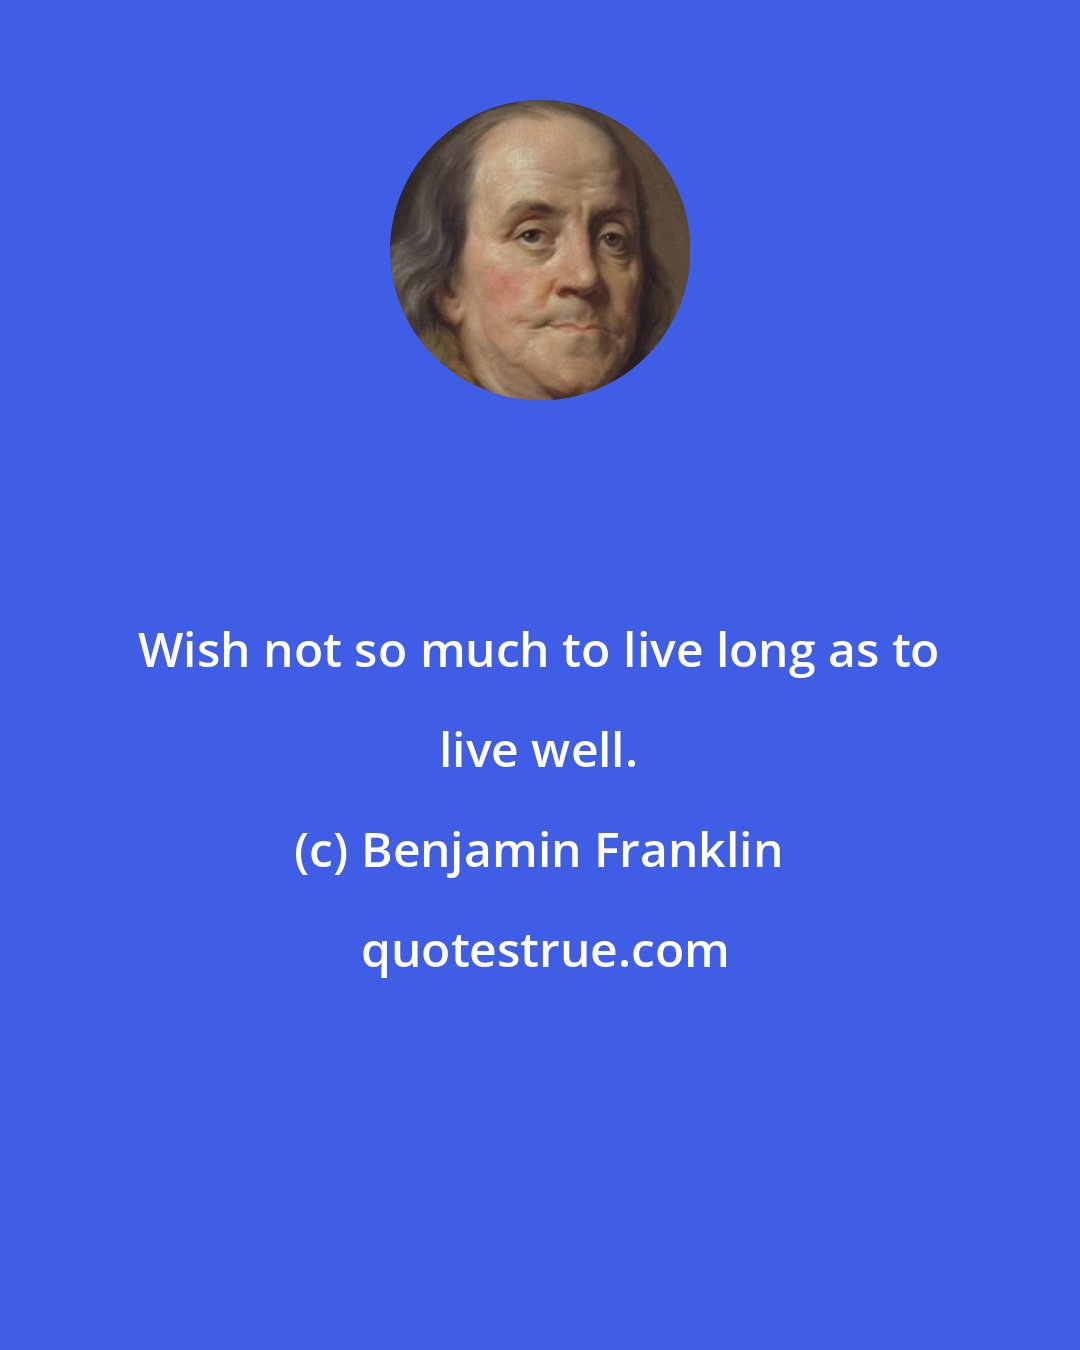 Benjamin Franklin: Wish not so much to live long as to live well.